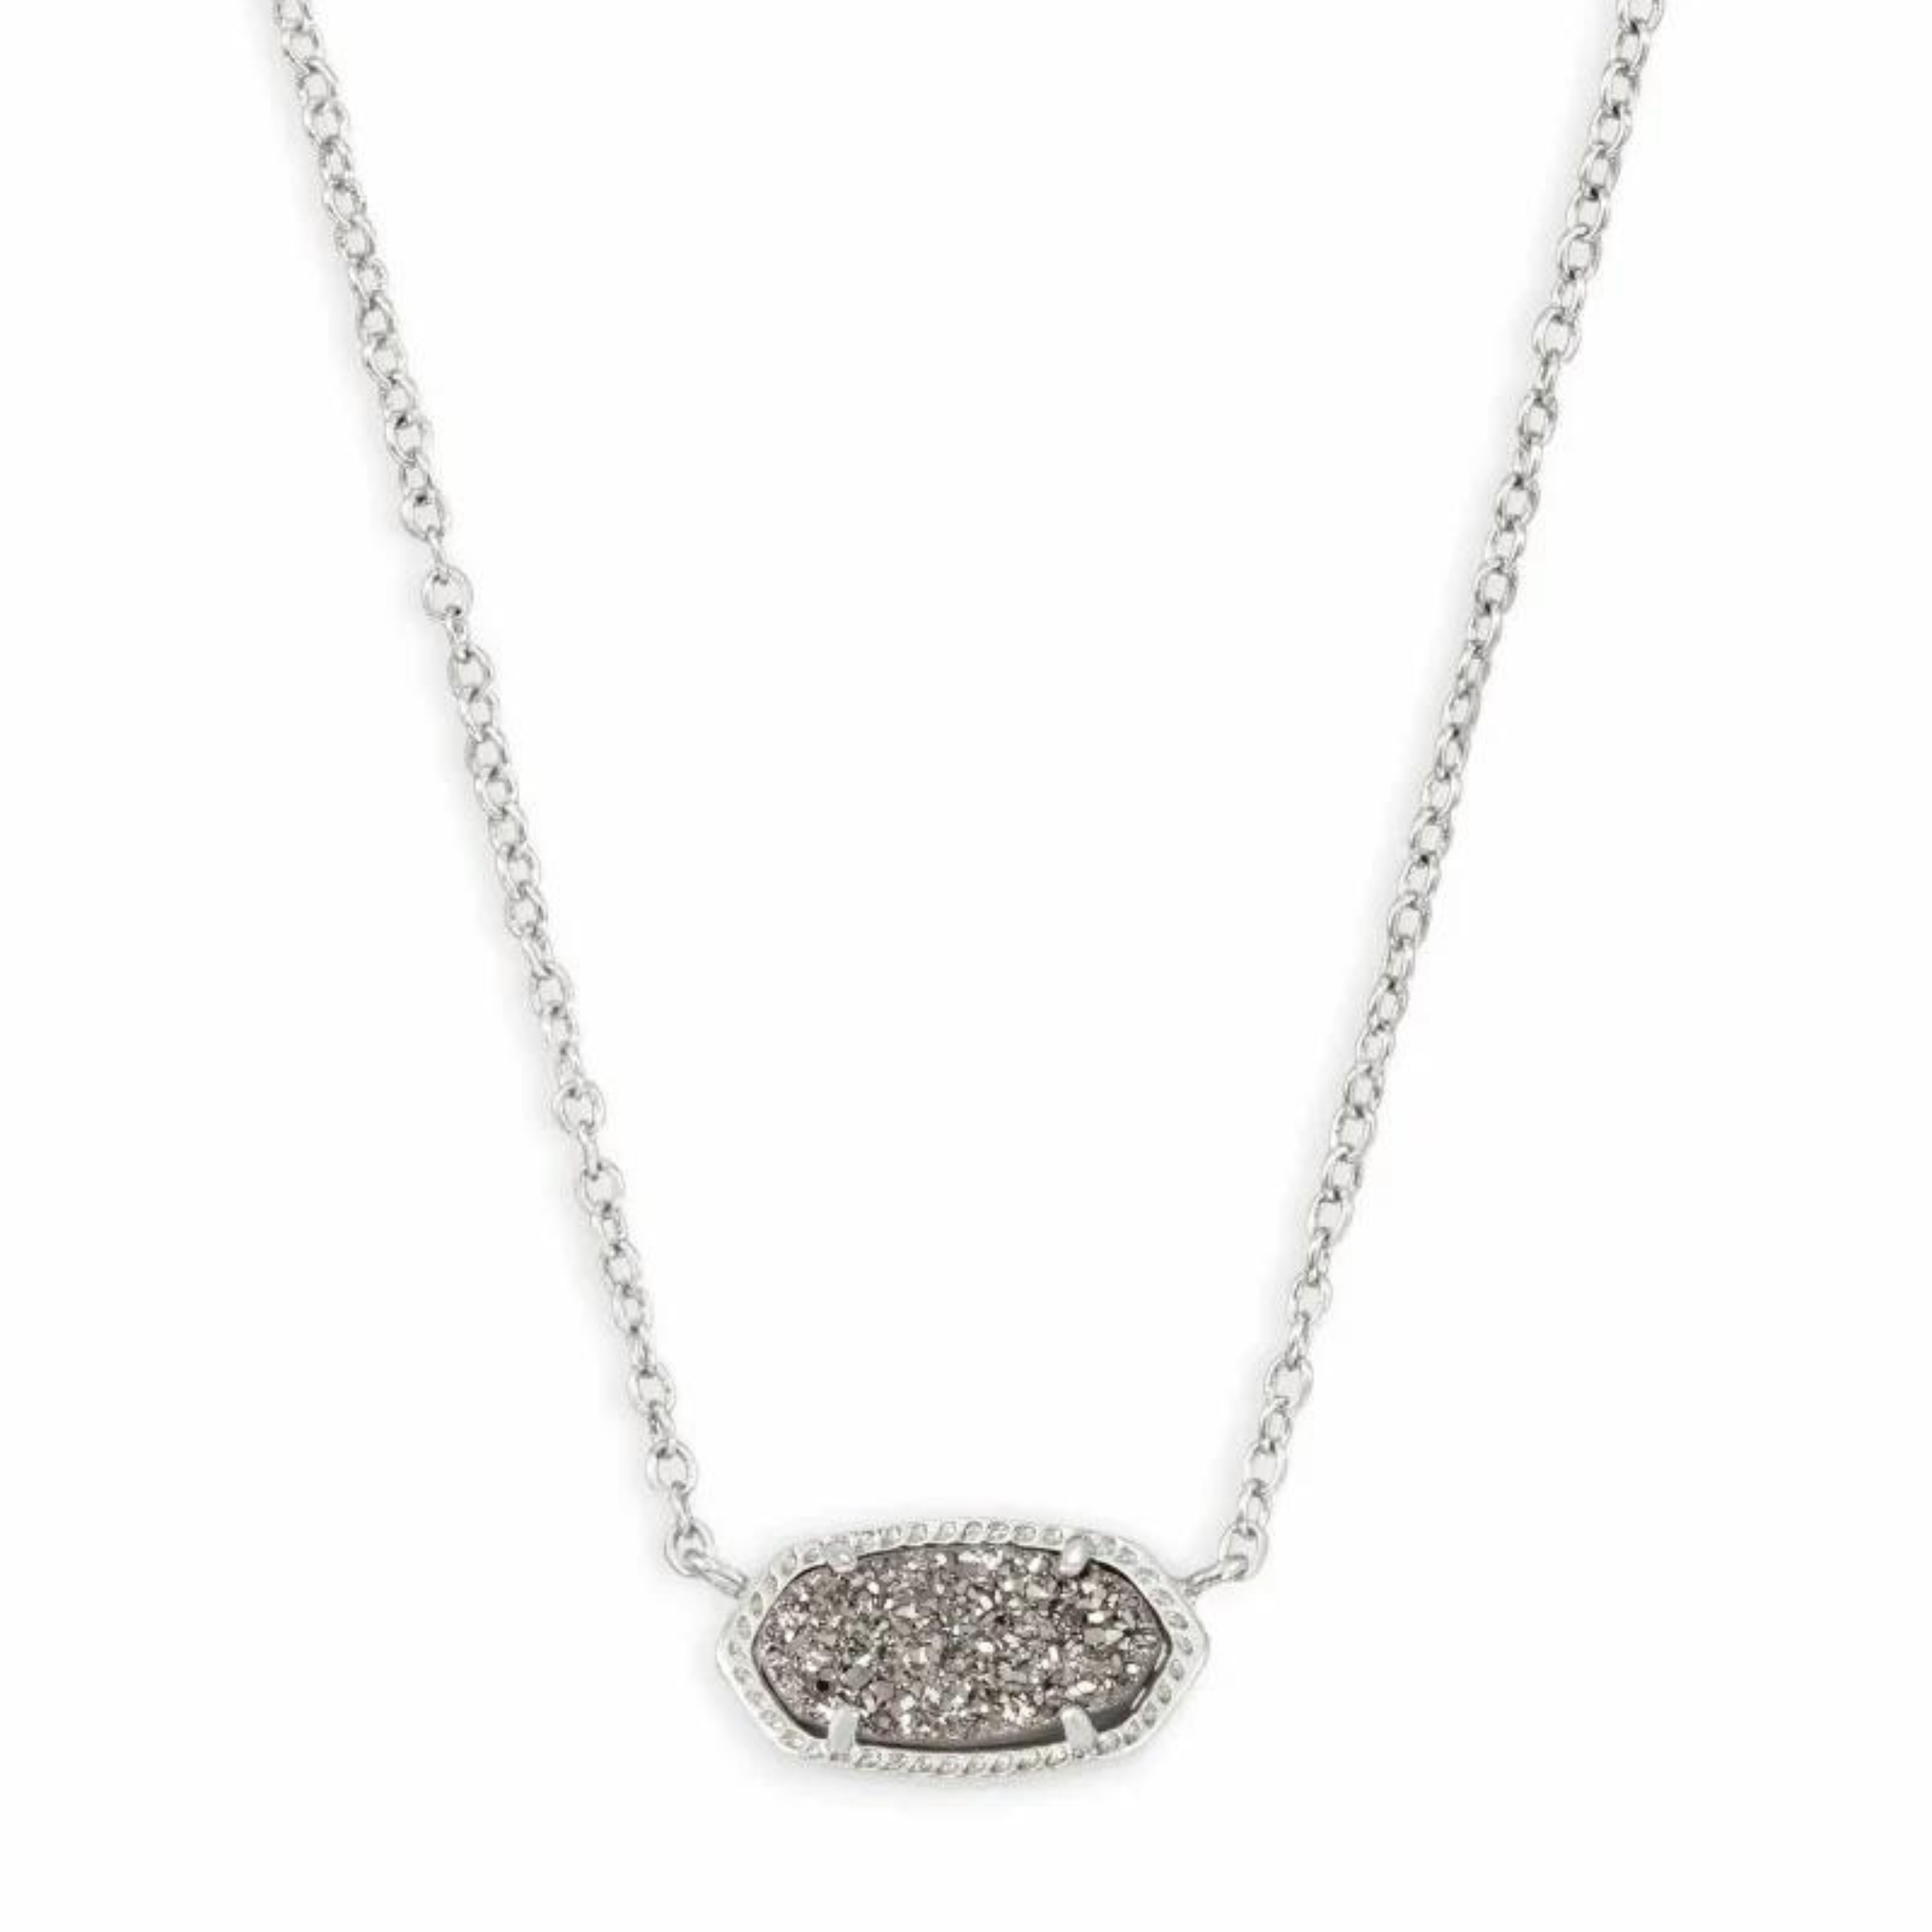 Silver necklace with platinum drusy stone pictured on a white background.